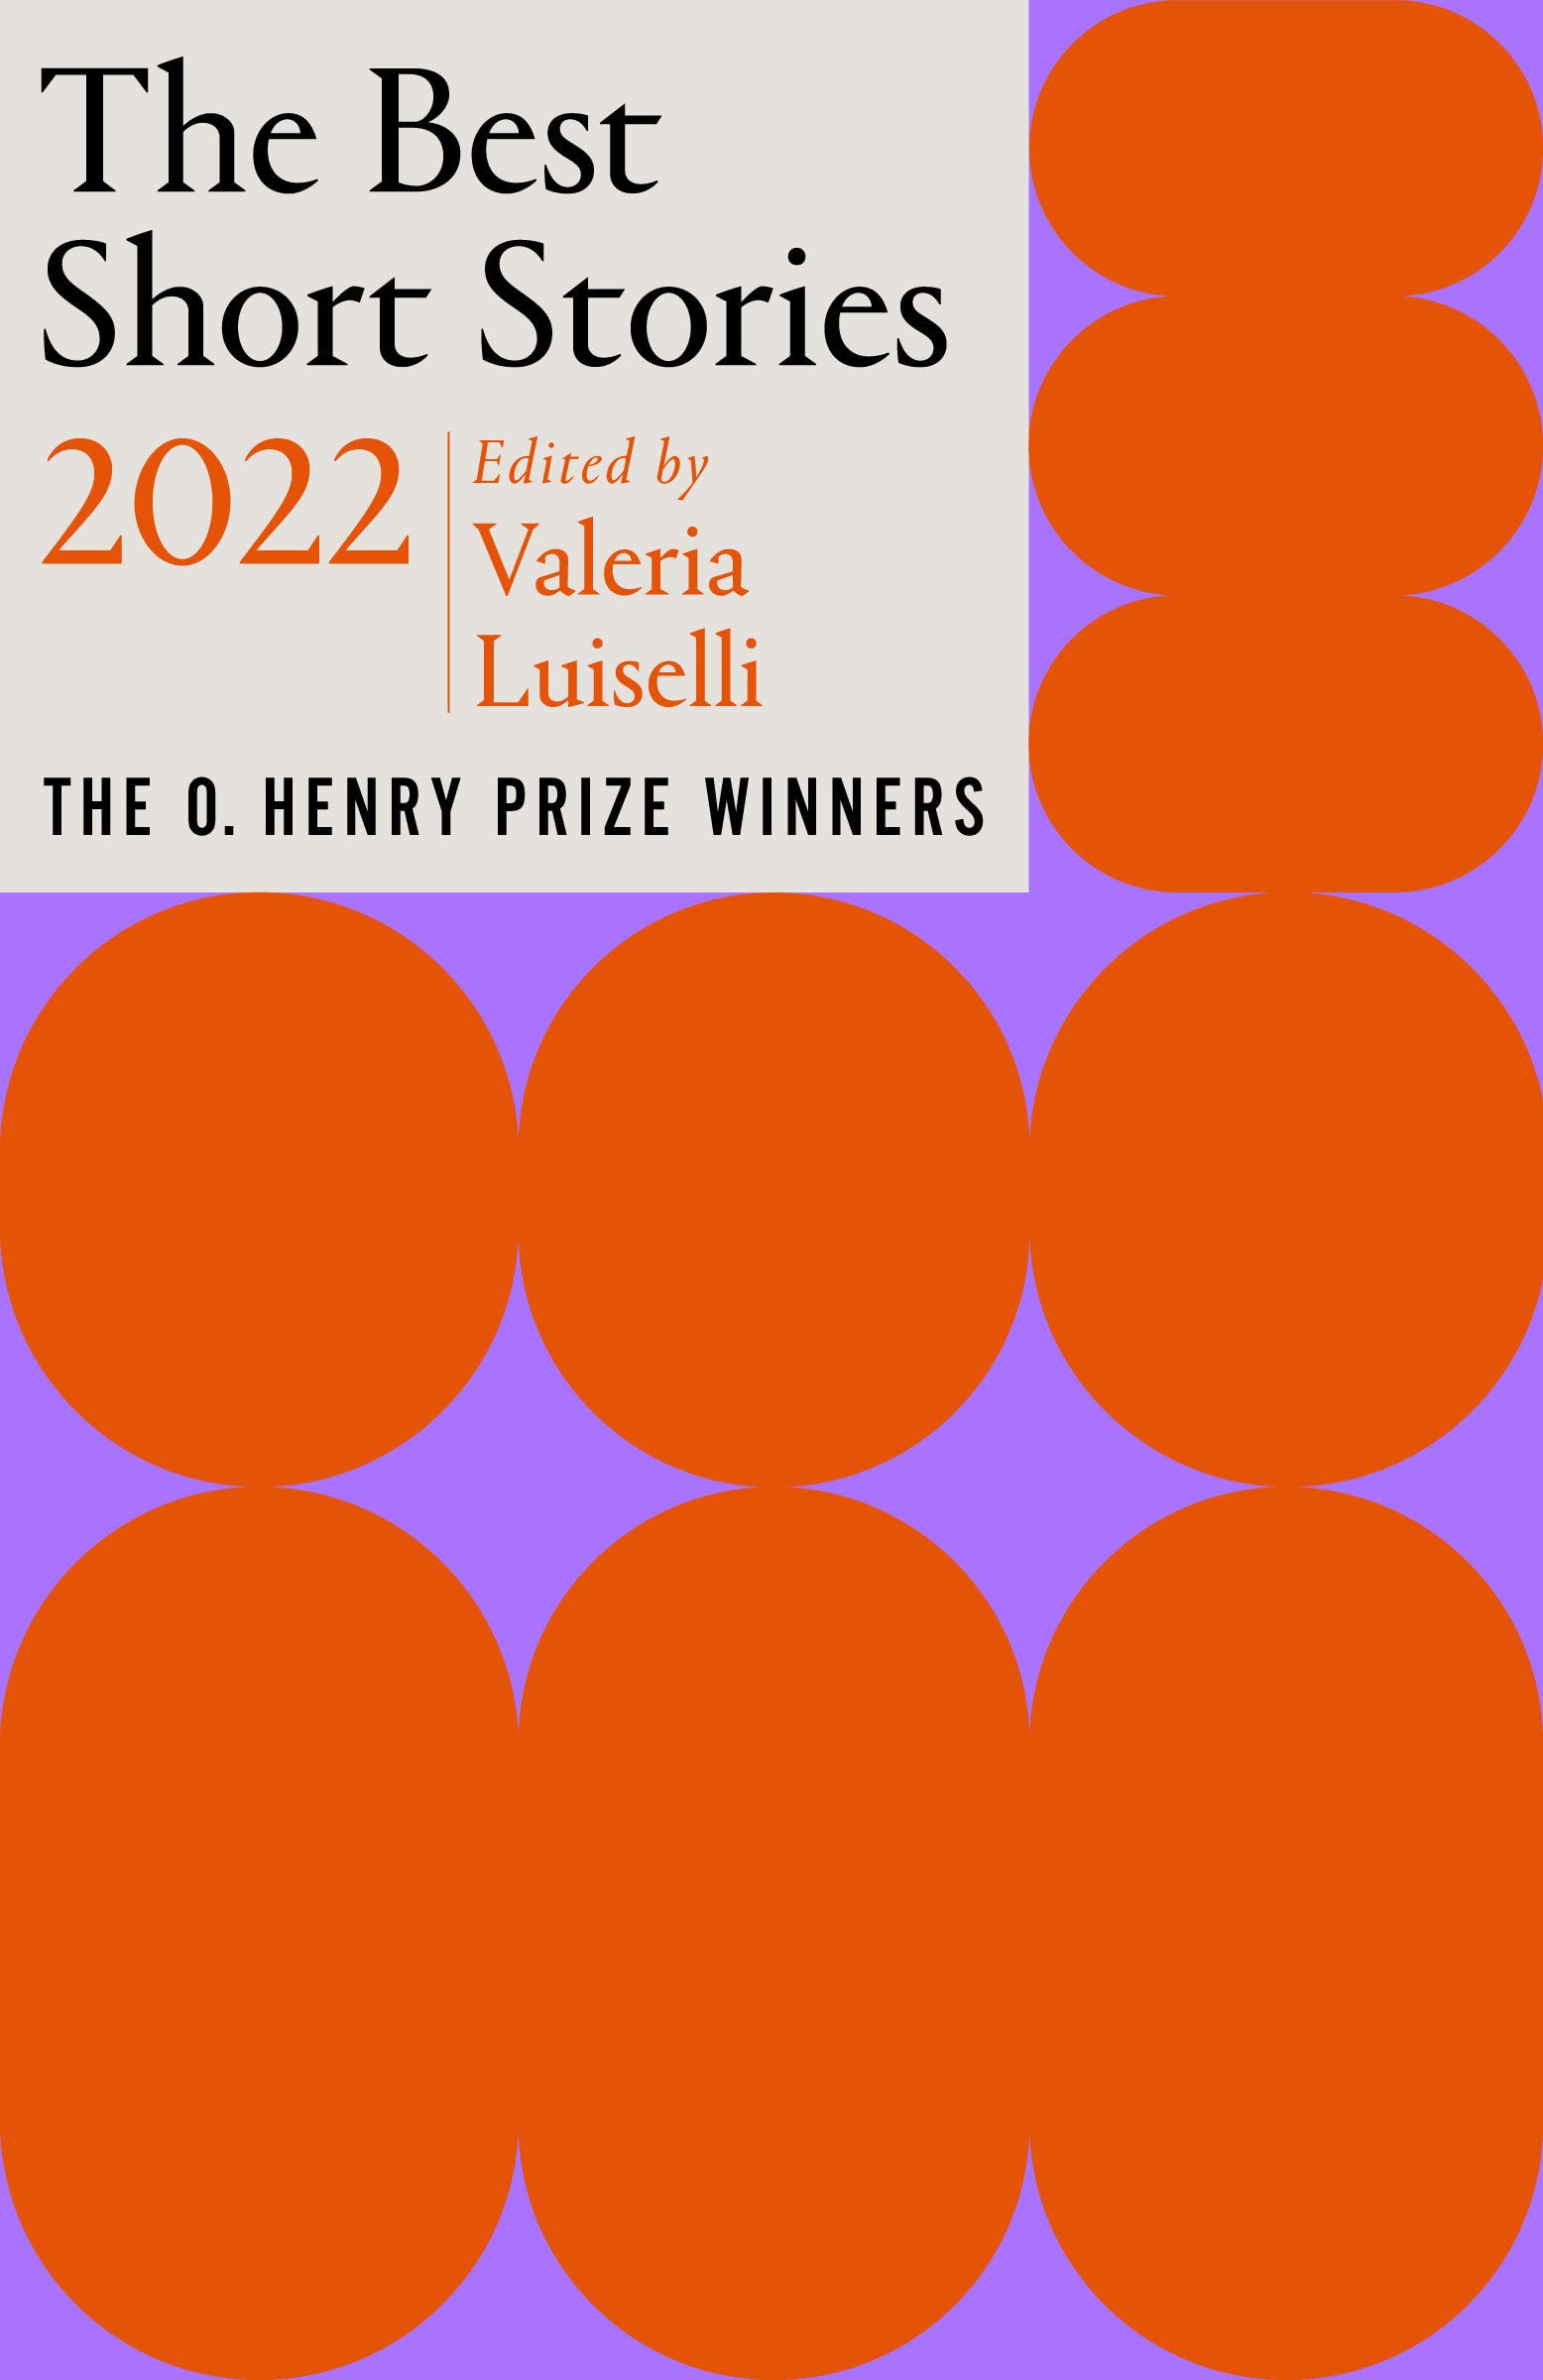 Cover of The Best Short Stories 2022: The O. Henry Prize Winners, edited by Valeria Luiselli. The text is in a white box in the upper left corner, and the rest shows a design of orange ovals on a purple backdrop